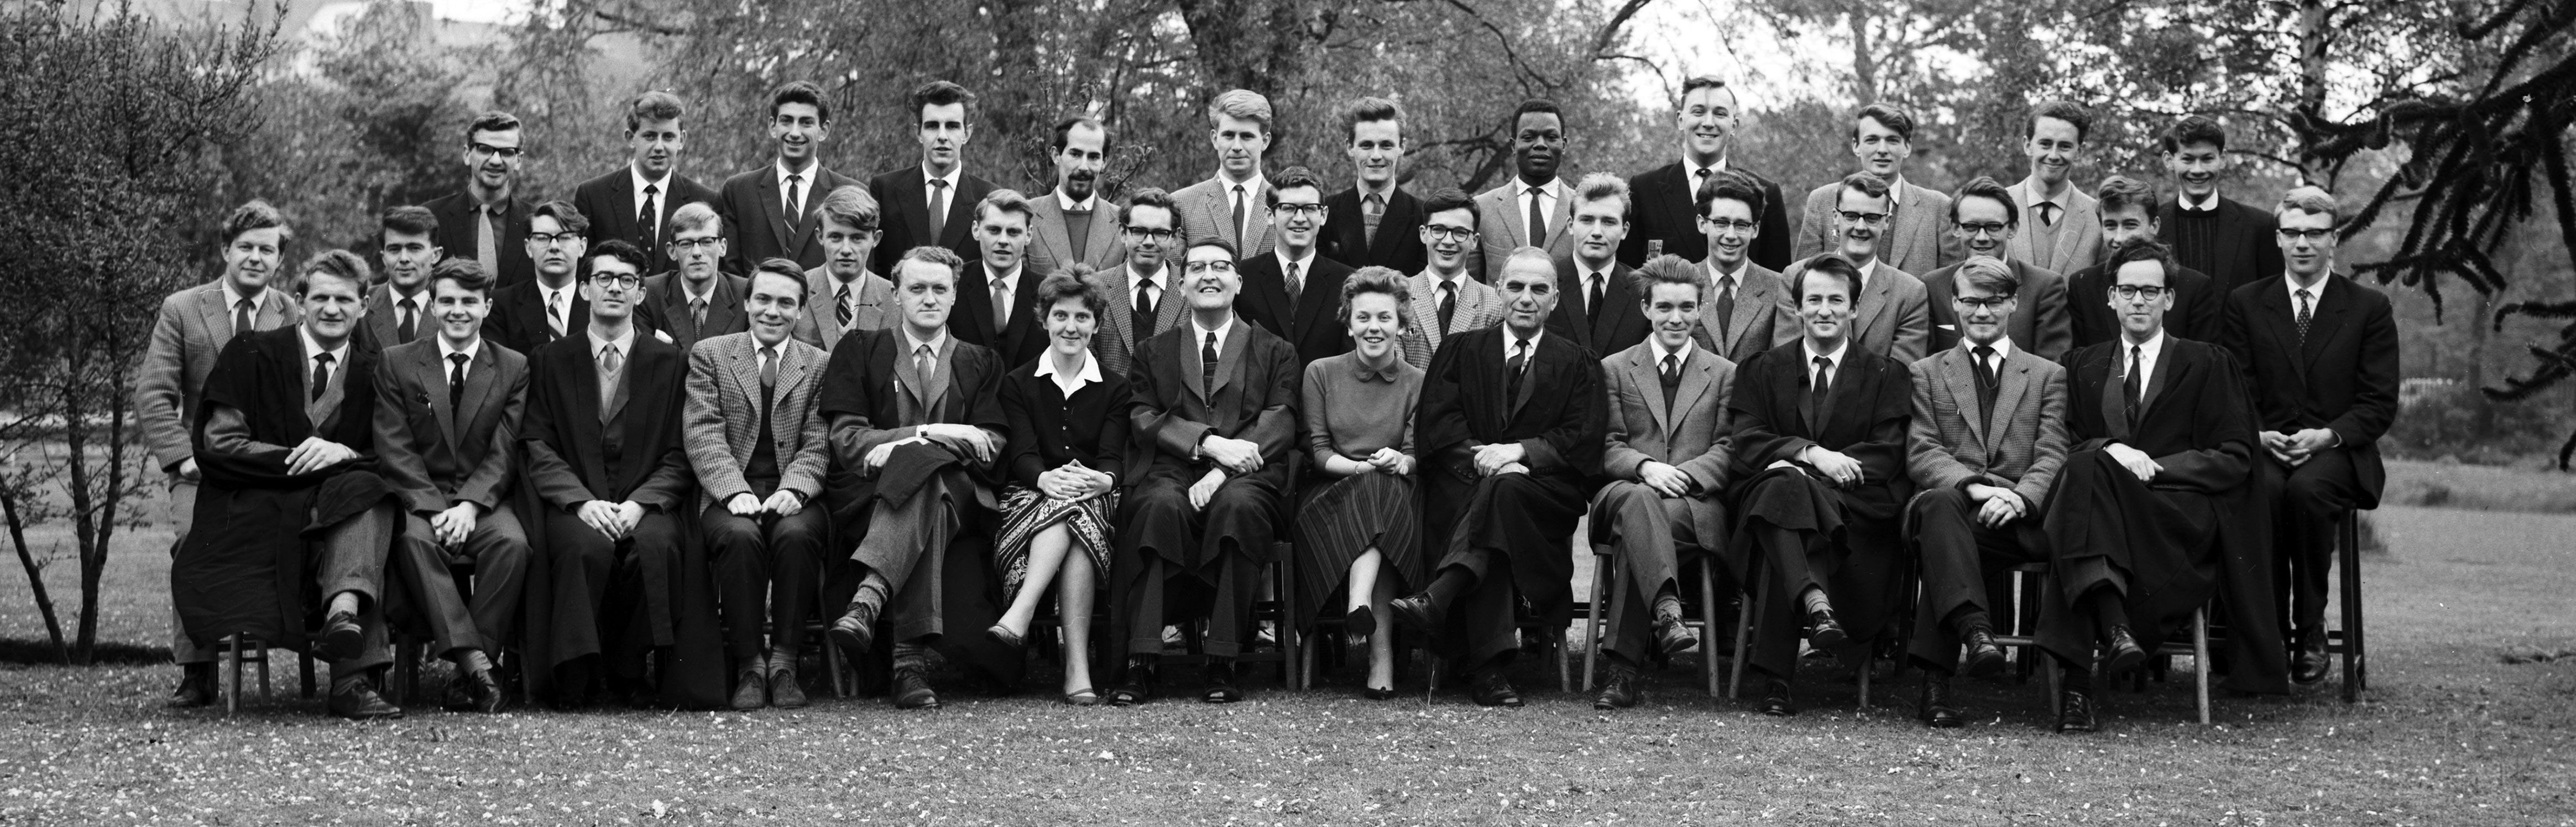 Geography Department Undergraduate Group photo from 1962